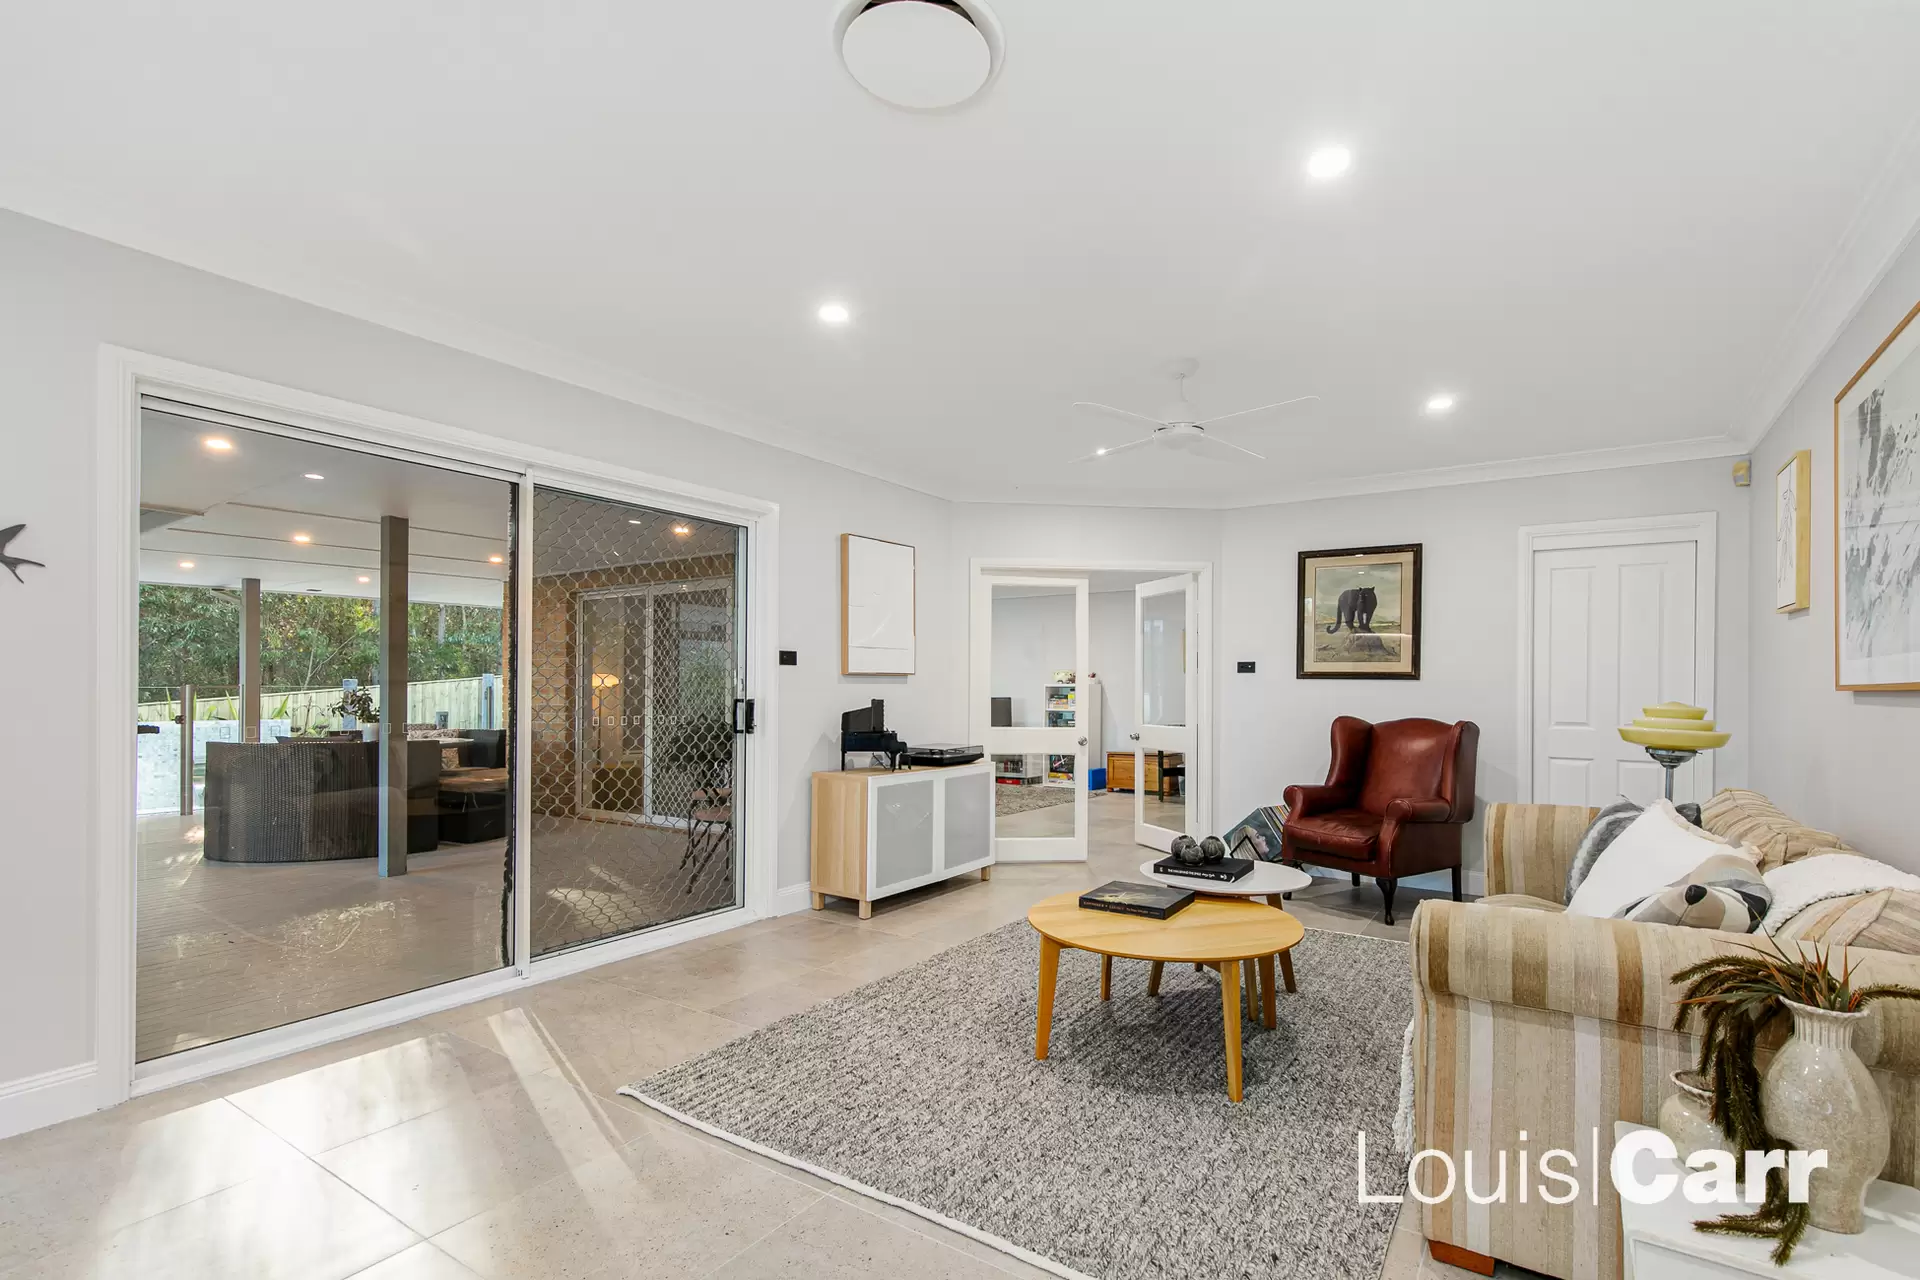 Photo #9: 4 Gumleaf Place, West Pennant Hills - Sold by Louis Carr Real Estate